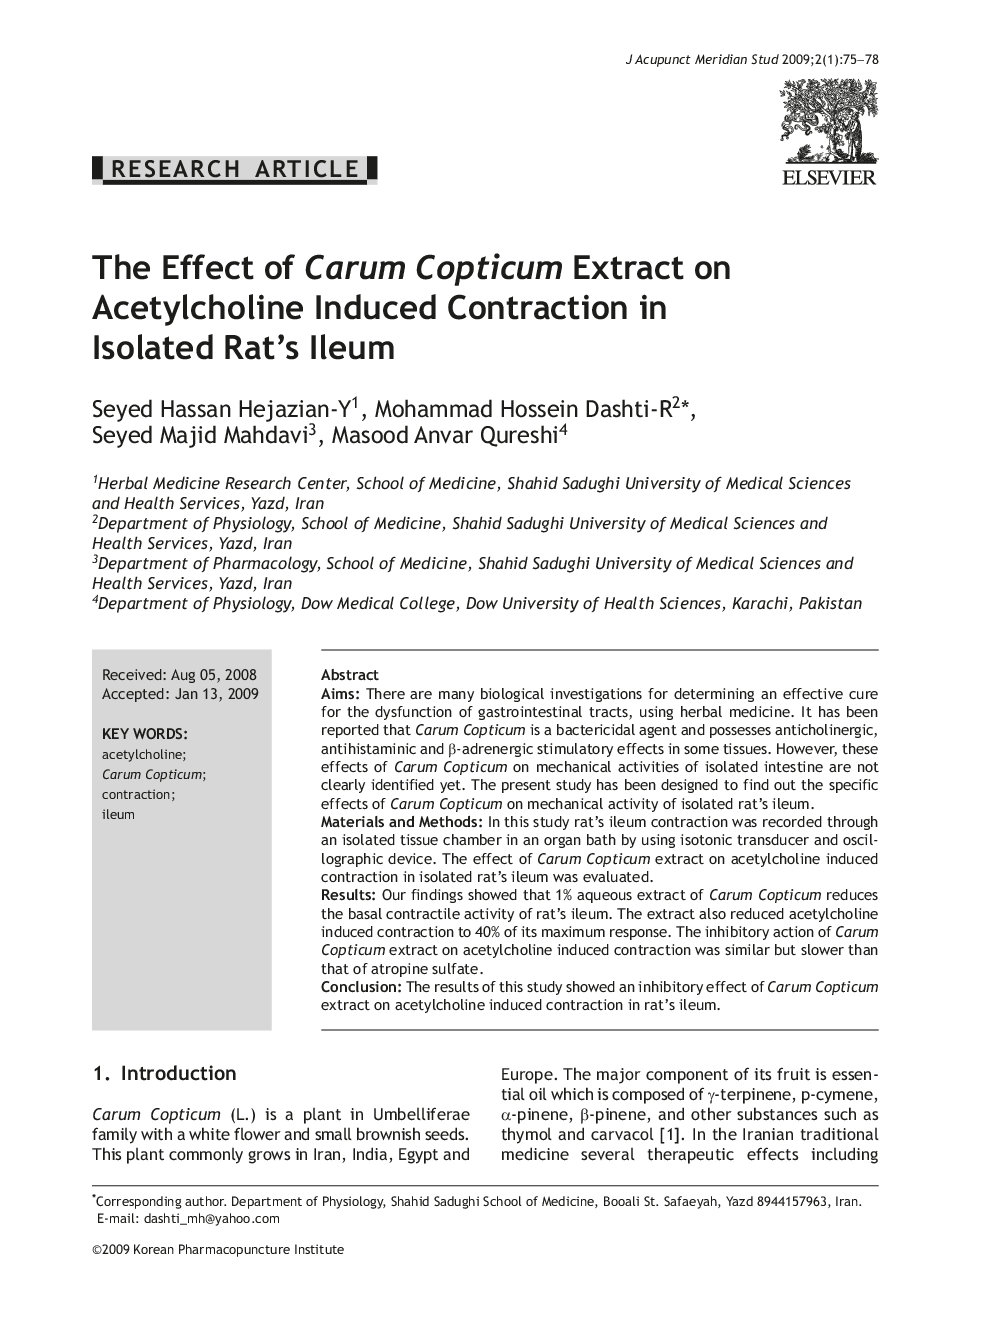 The Effect of Carum Copticum Extract on Acetylcholine Induced Contraction in Isolated Rat's Ileum